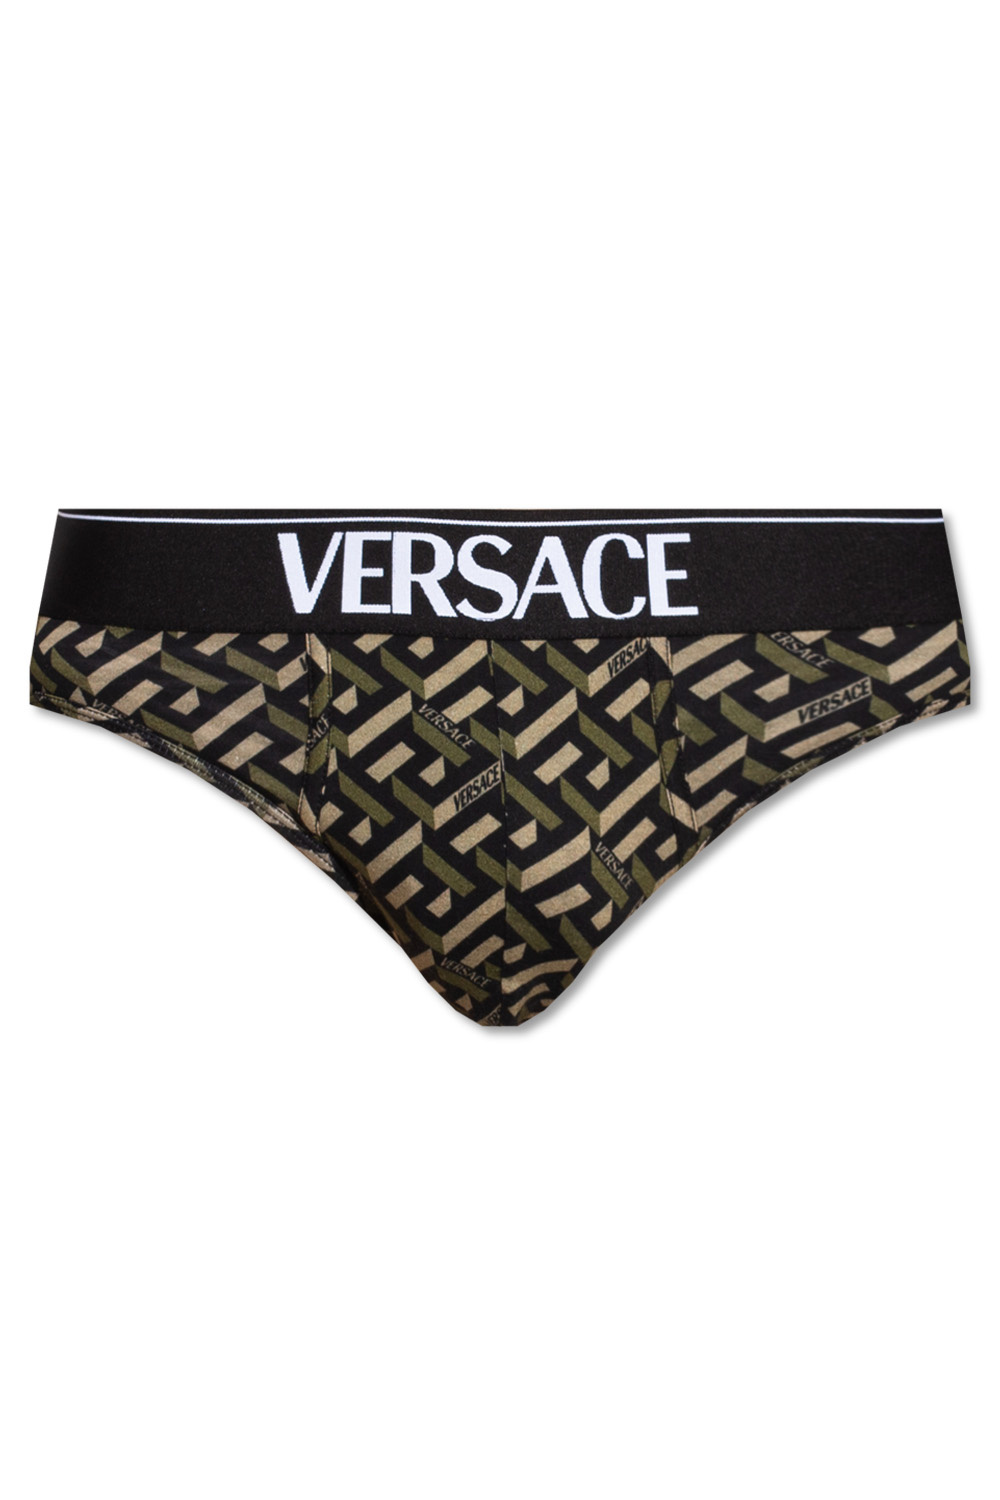 Versace Recommended for you